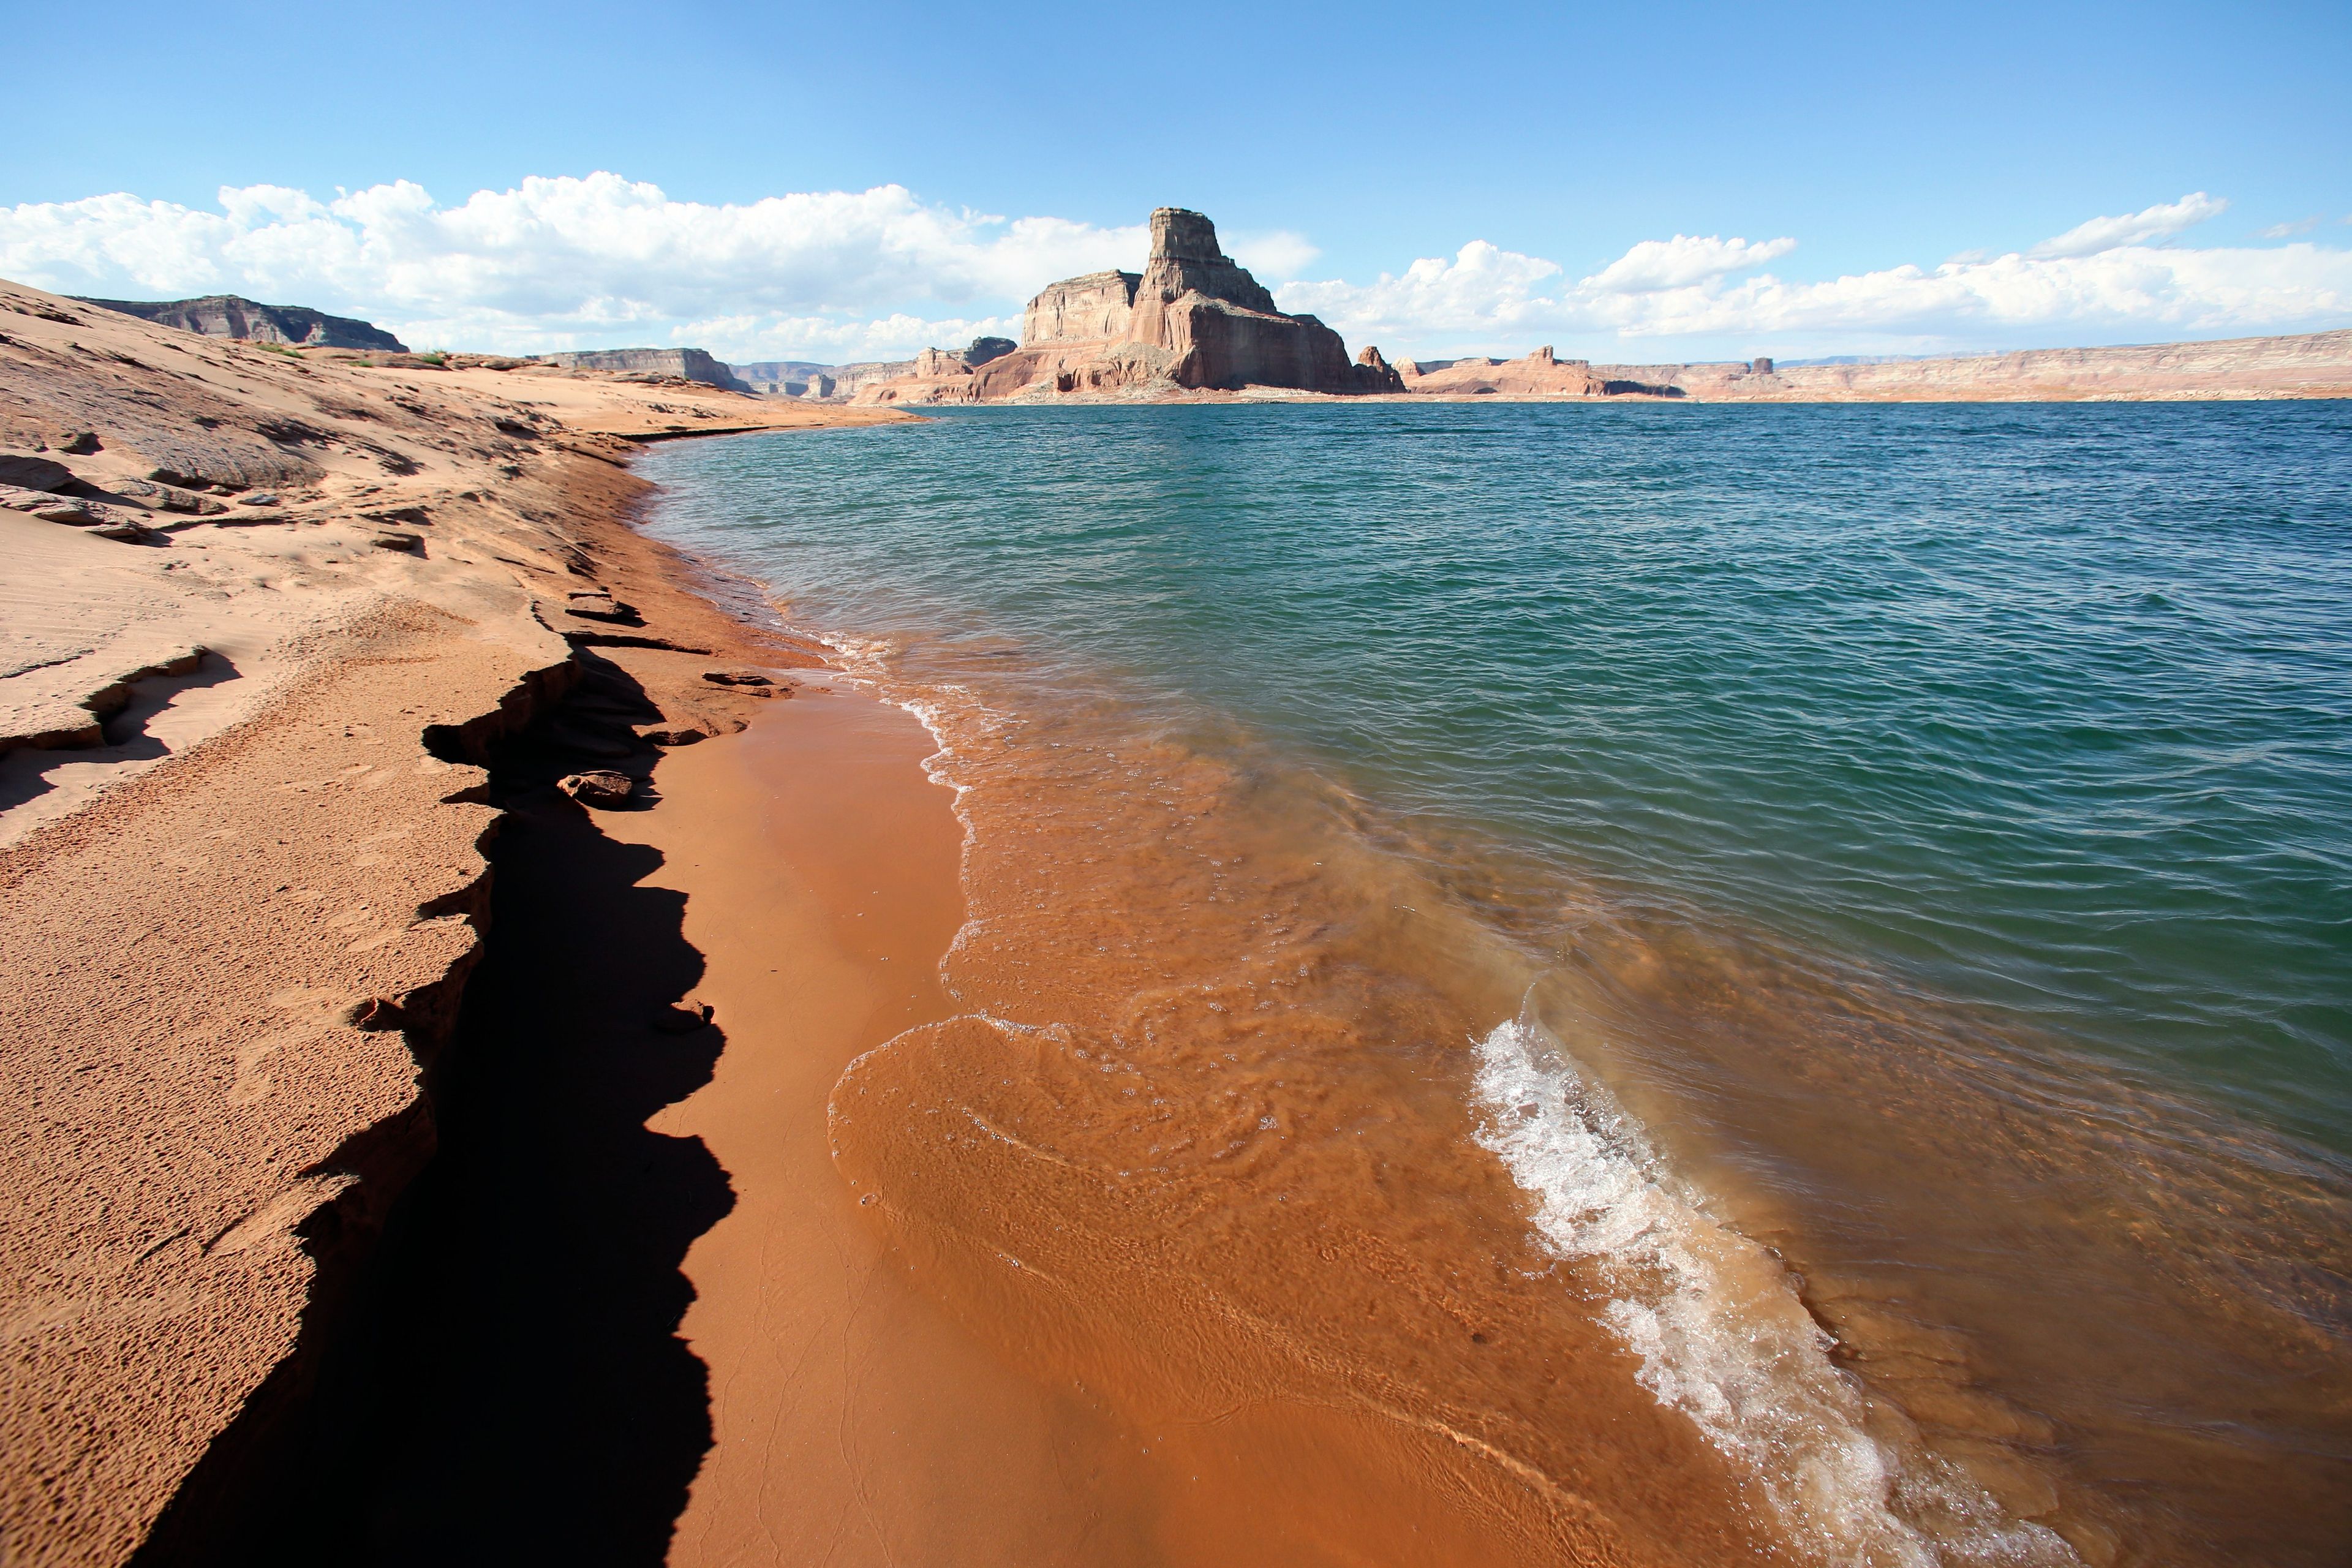 The red rock beach of Lake Powell.